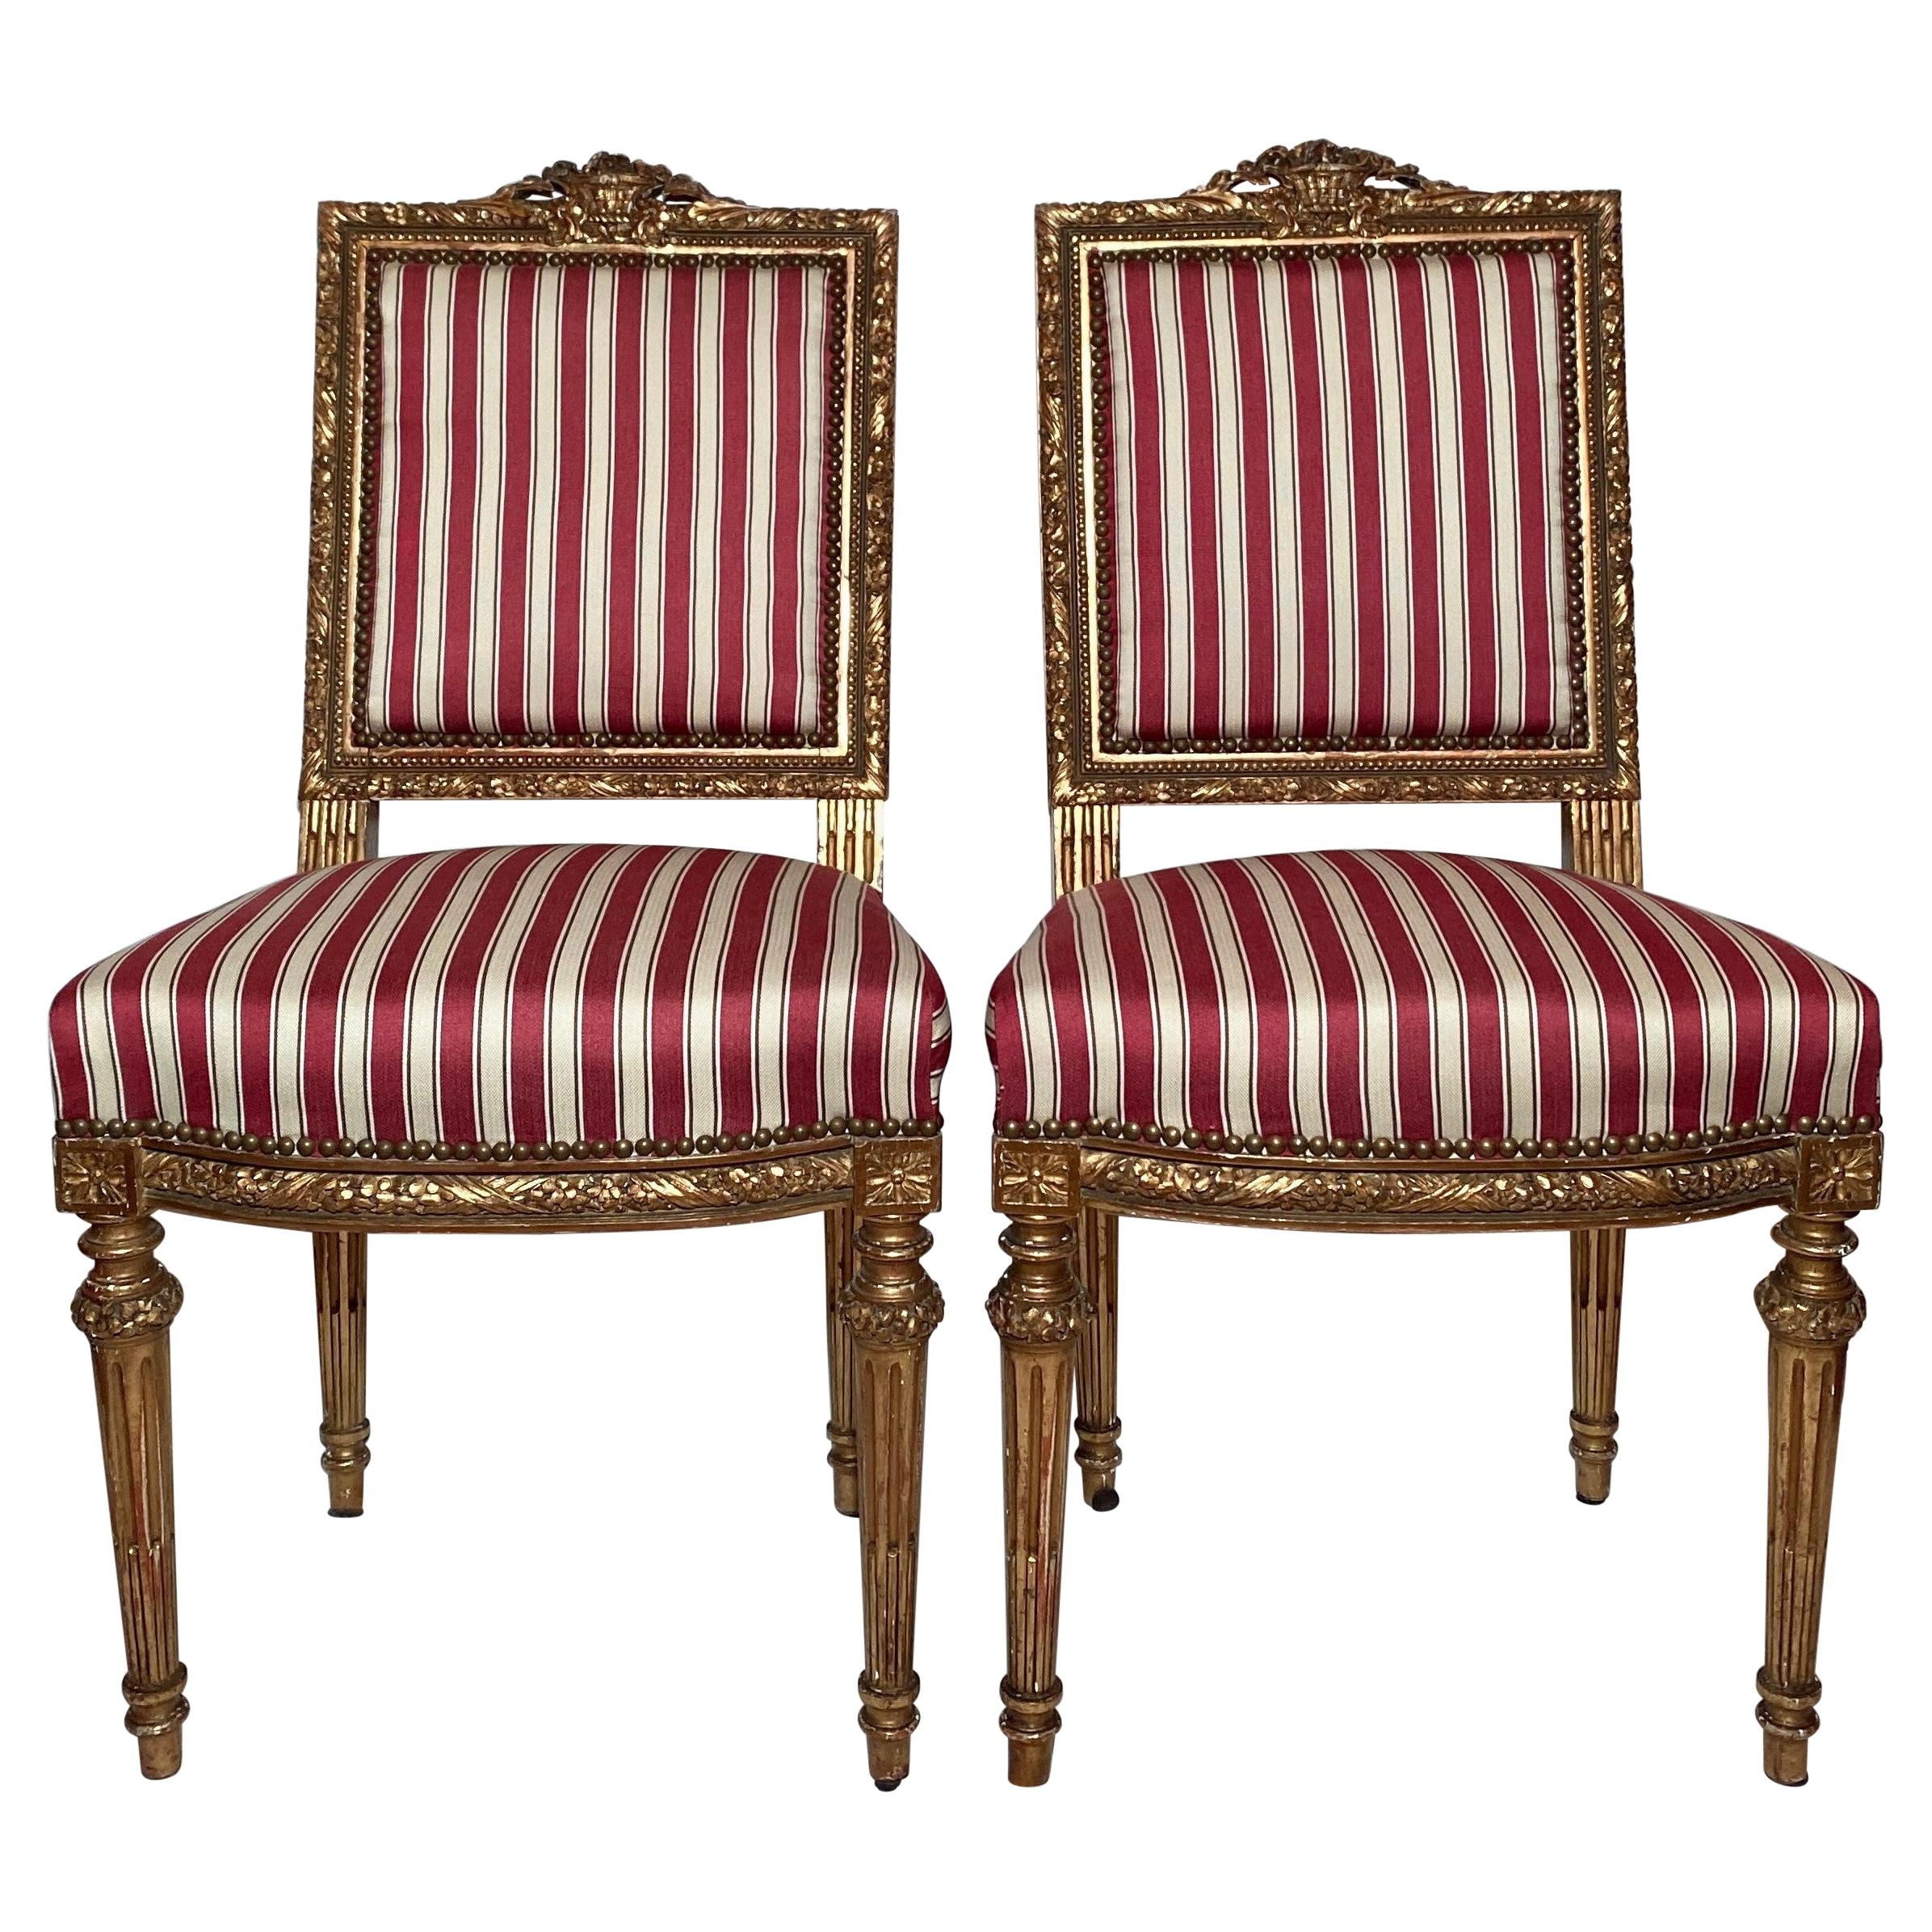 Pair Antique French 19th Century Napoleon III Side Chairs, Carved Wood with Gold